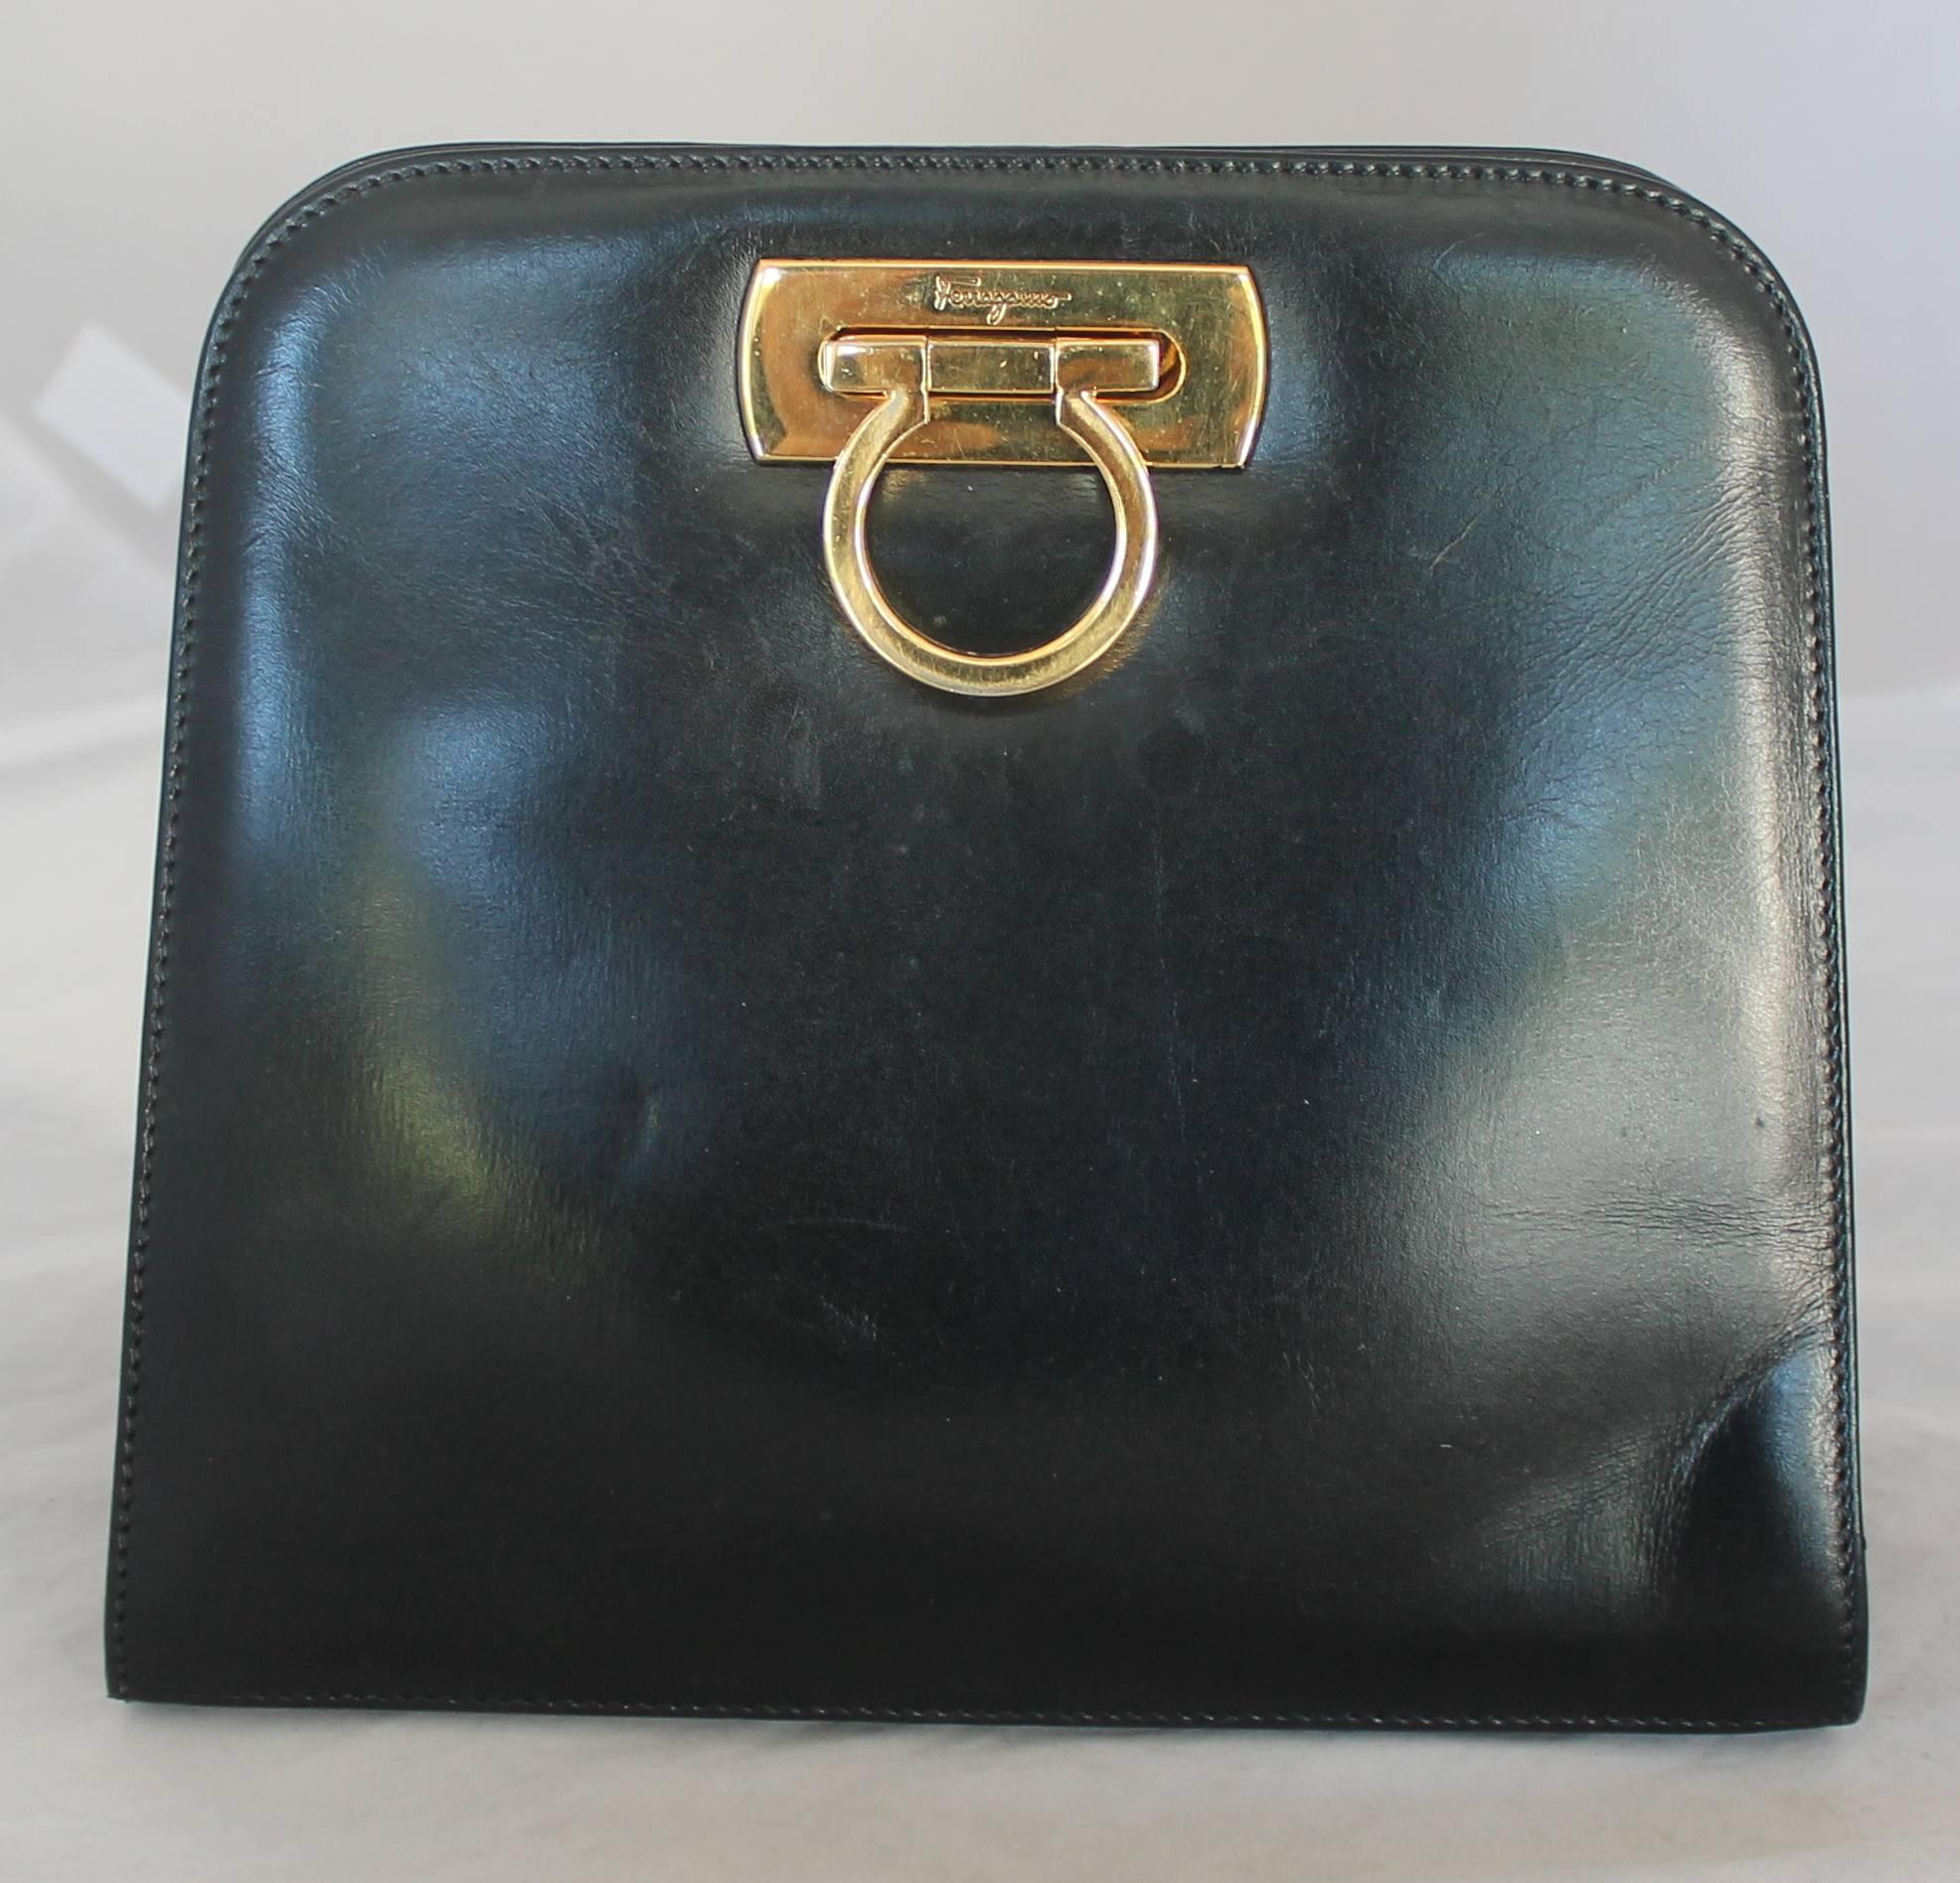 Salvatore Ferragamo 1980's Black Leather Square Clutch/Cross Body Bag - GHW.  This vintage bag is in very good condition having only a few marks on it.  It can be used as a clutch or worn as a cross body or shoulder bag with its beautiful gold link